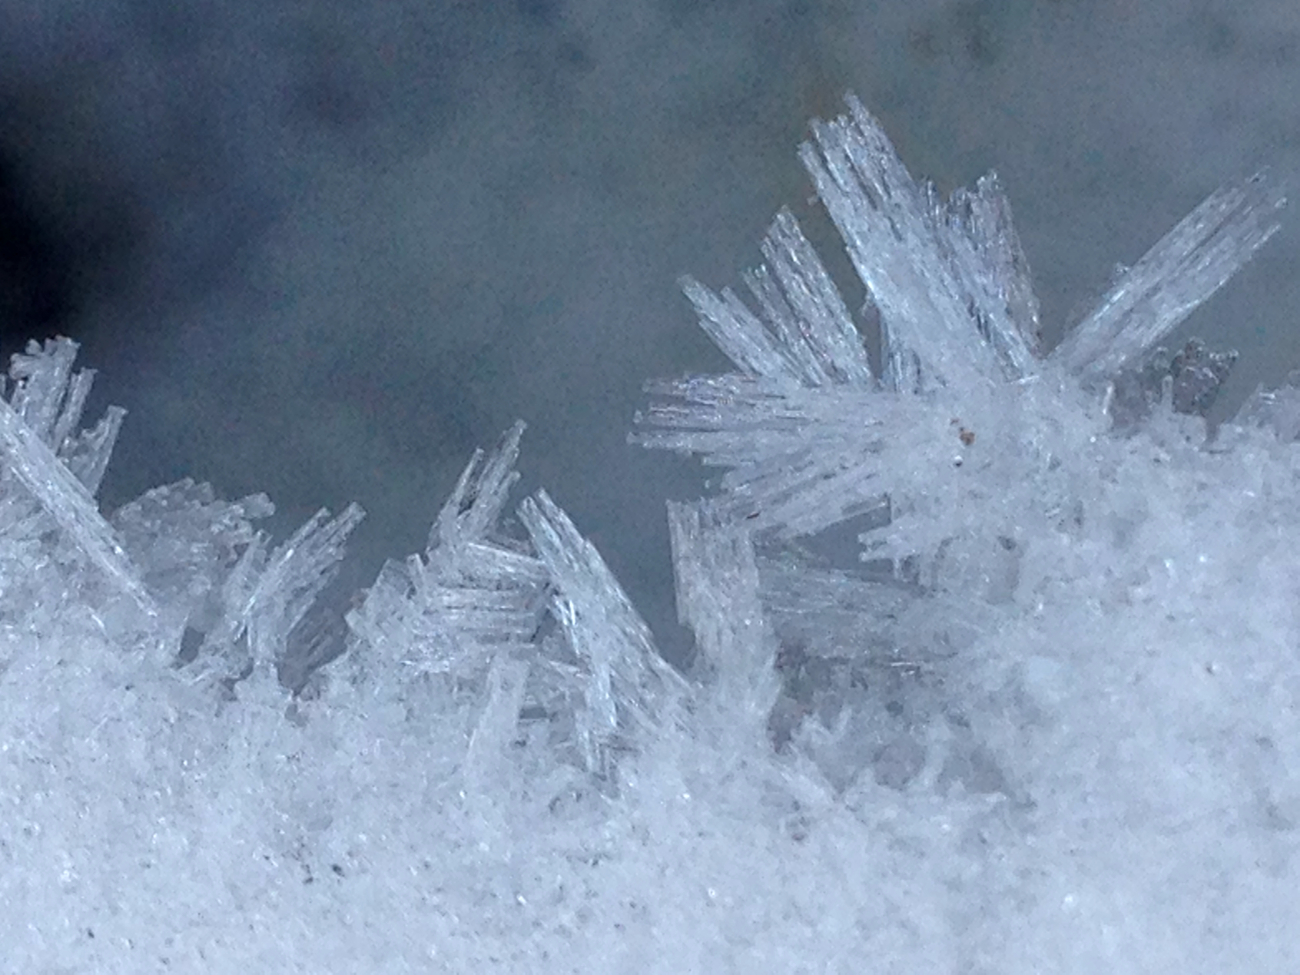 Close up picture of ice crystals that formed along a frozen creek duringthe second coldest February on record in Nazareth